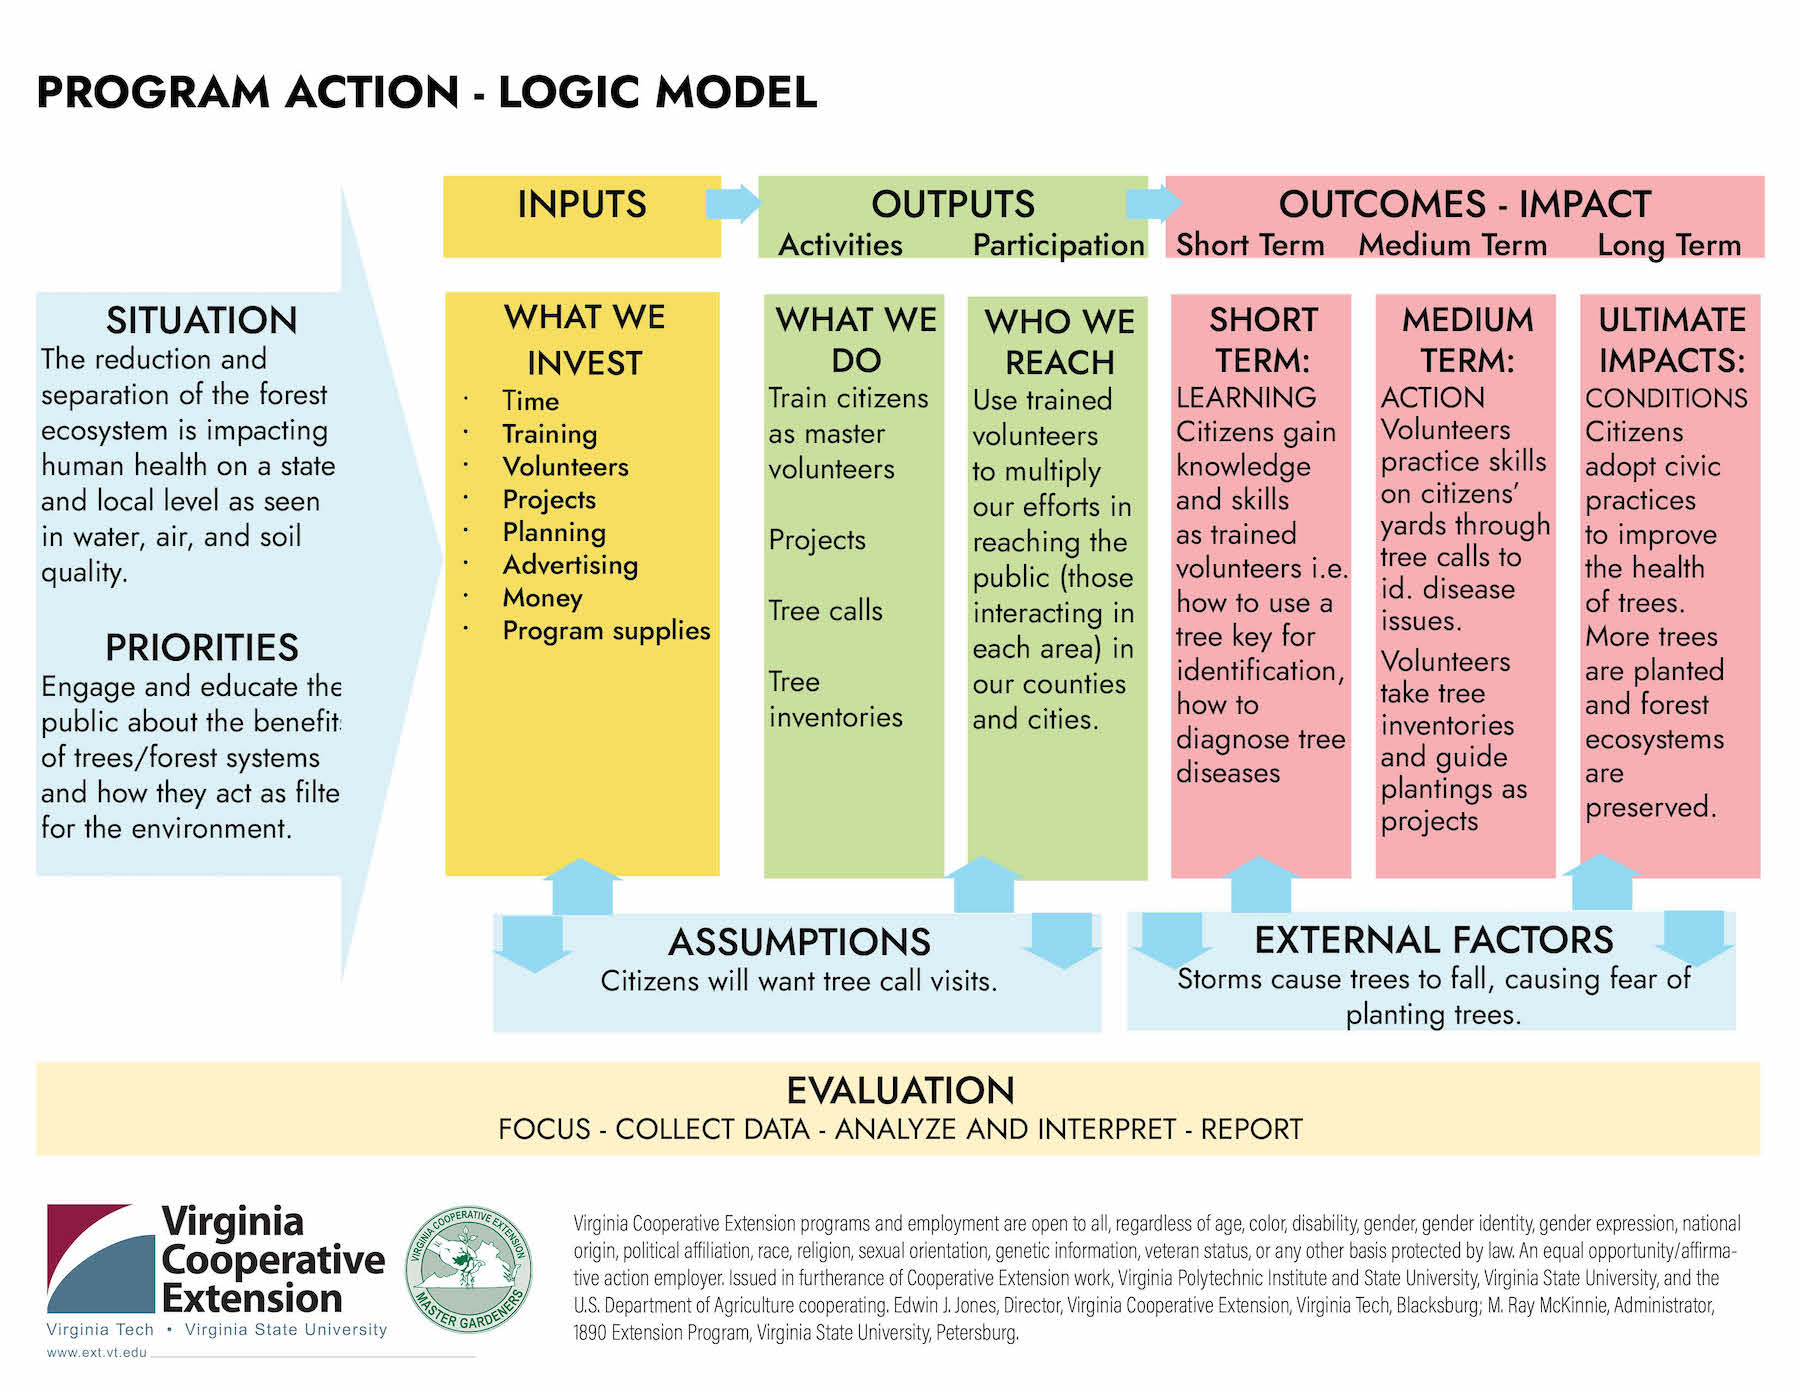 Title: PROGRAM ACTION - LOGIC MODEL; SITUATION: The reduction and separation of the forest ecosystem is impacting human health on a state and local level as seen in water, air, and soil quality. PRIORITIES: Engage and educate the public about the benefits of trees/forest systems and how they act as filters for the environment. That leads to INPUTS: WHAT WE INVEST Time, Training, Volunteers, Projects, Planning, Advertising, Money, Program supplies; OUTPUTS: Activities: what we do: Train citizens as master volunteers, Projects, Tree calls, Tree inventories and Who we reach: Use trained volunteers to multiply our efforts in reaching the public (those interacting in each area) in our counties and cities; OUTCOMES AND IMPACT: short term: LEARNING Citizens gain knowledge and skills as trained volunteers i.e. how to use a tree key for identification, how to diagnose tree diseases, Medium term: ACTION Volunteers practice skills on citizens’ yards through tree calls to id. disease issues. Volunteers take tree inventories and guide plantings as projects, Ultimate impacts: Citizens adopt civic practices to improve the health of trees. More trees are planted and forest ecosystems are preserved. All of these are mitigated by assumptions (citizens will want tree call visits) and external factors (storms cause trees to fall, causing fear of planting trees). Final step is evaluation: focus, collect data, analyze, and interpret/report.